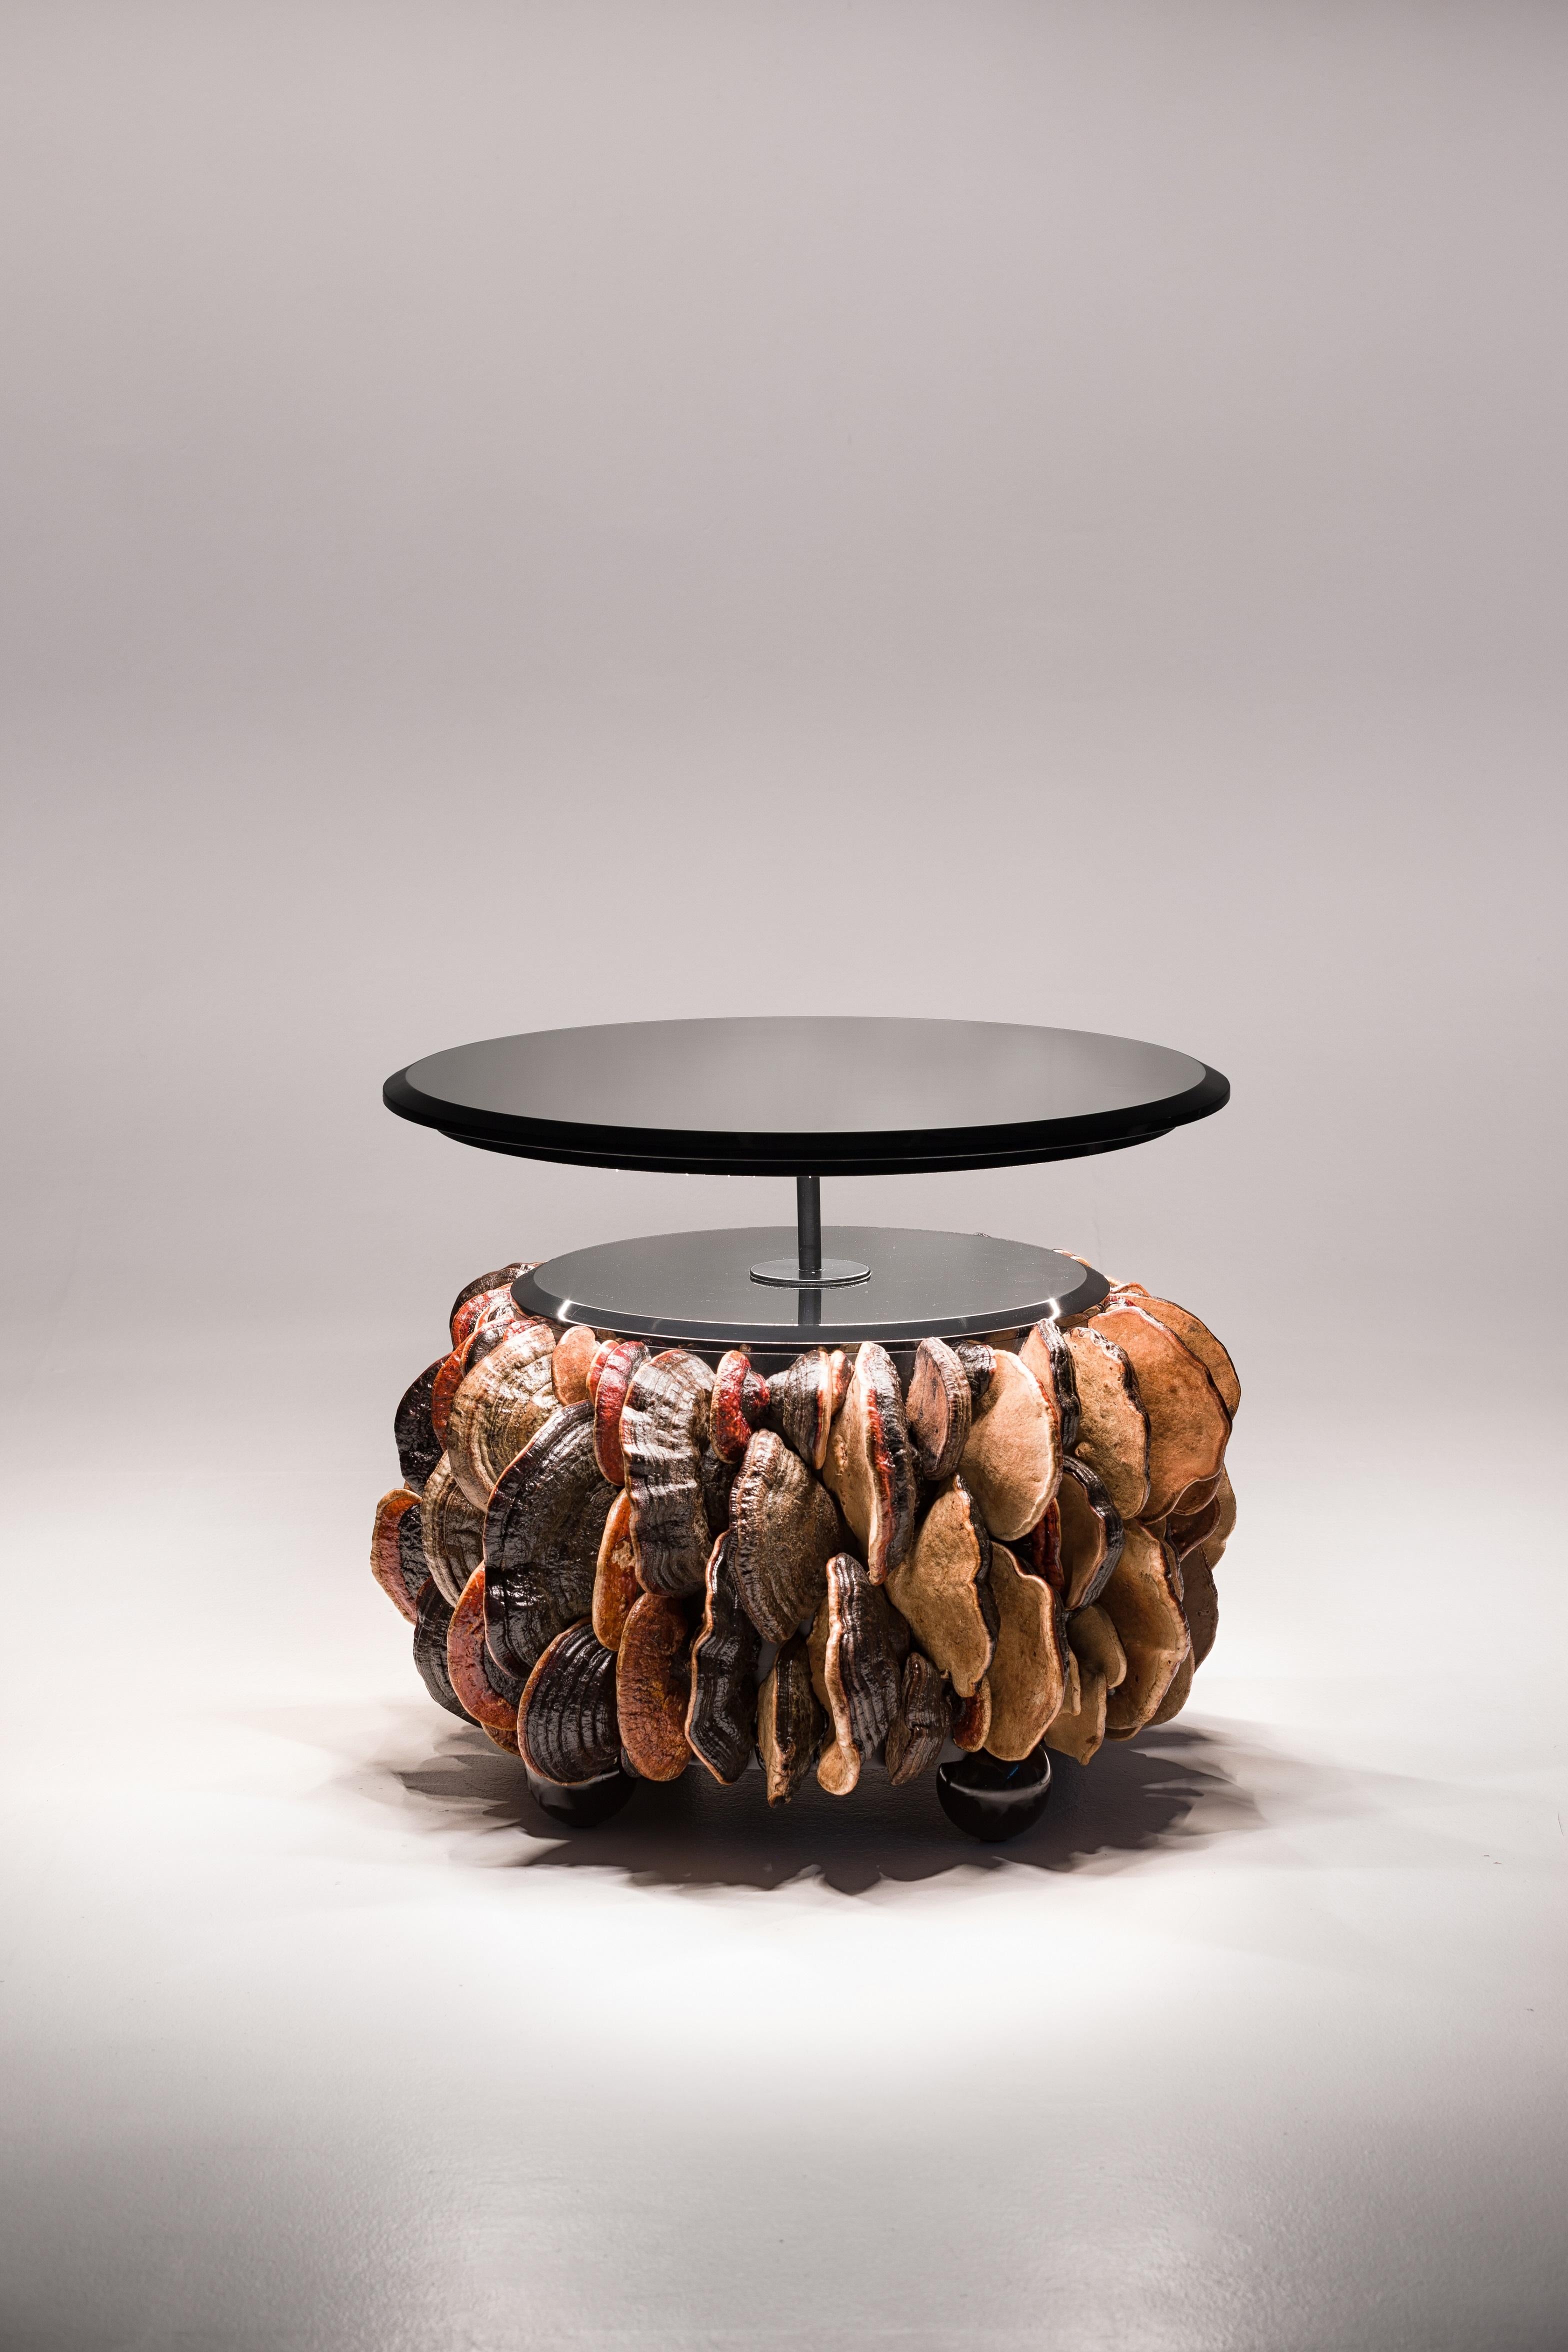 Arts and Crafts Highend Center Table Mushrooms Collection with Black Tabletop and Illumination For Sale